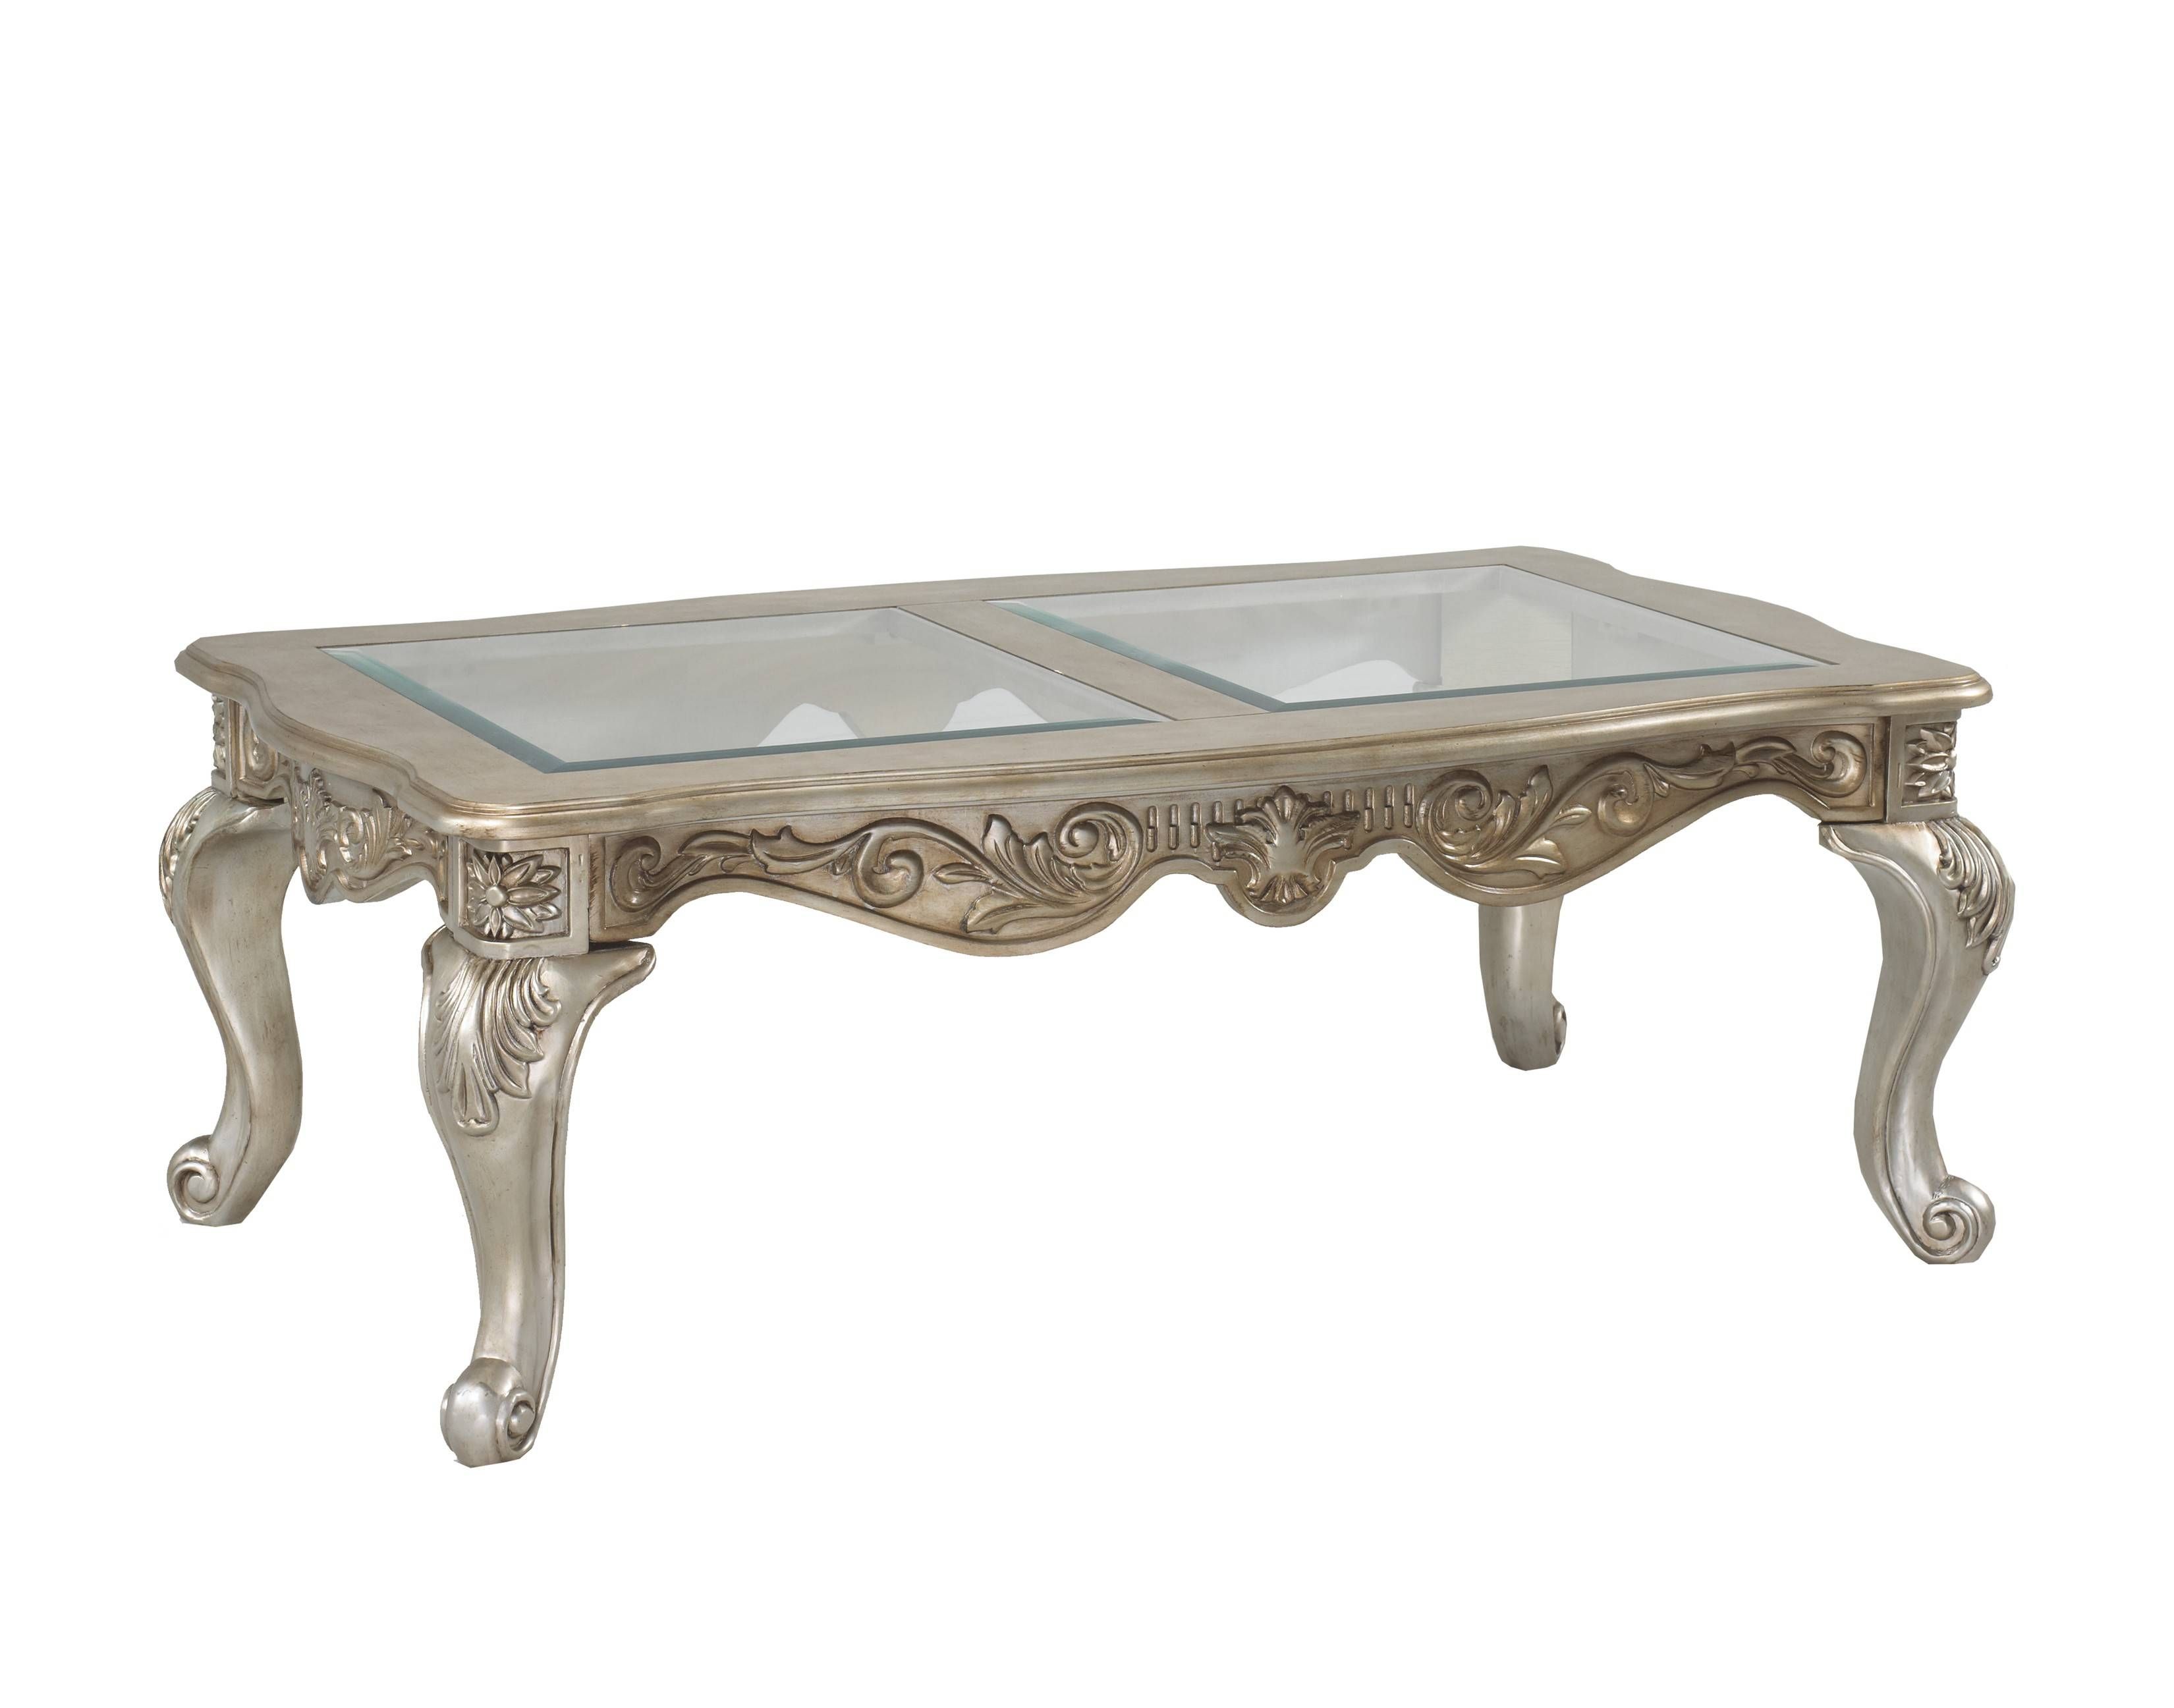 Antique French Glass Top Coffee Tables | Coffee Tables Decoration Within Vintage Glass Coffee Tables (View 1 of 30)